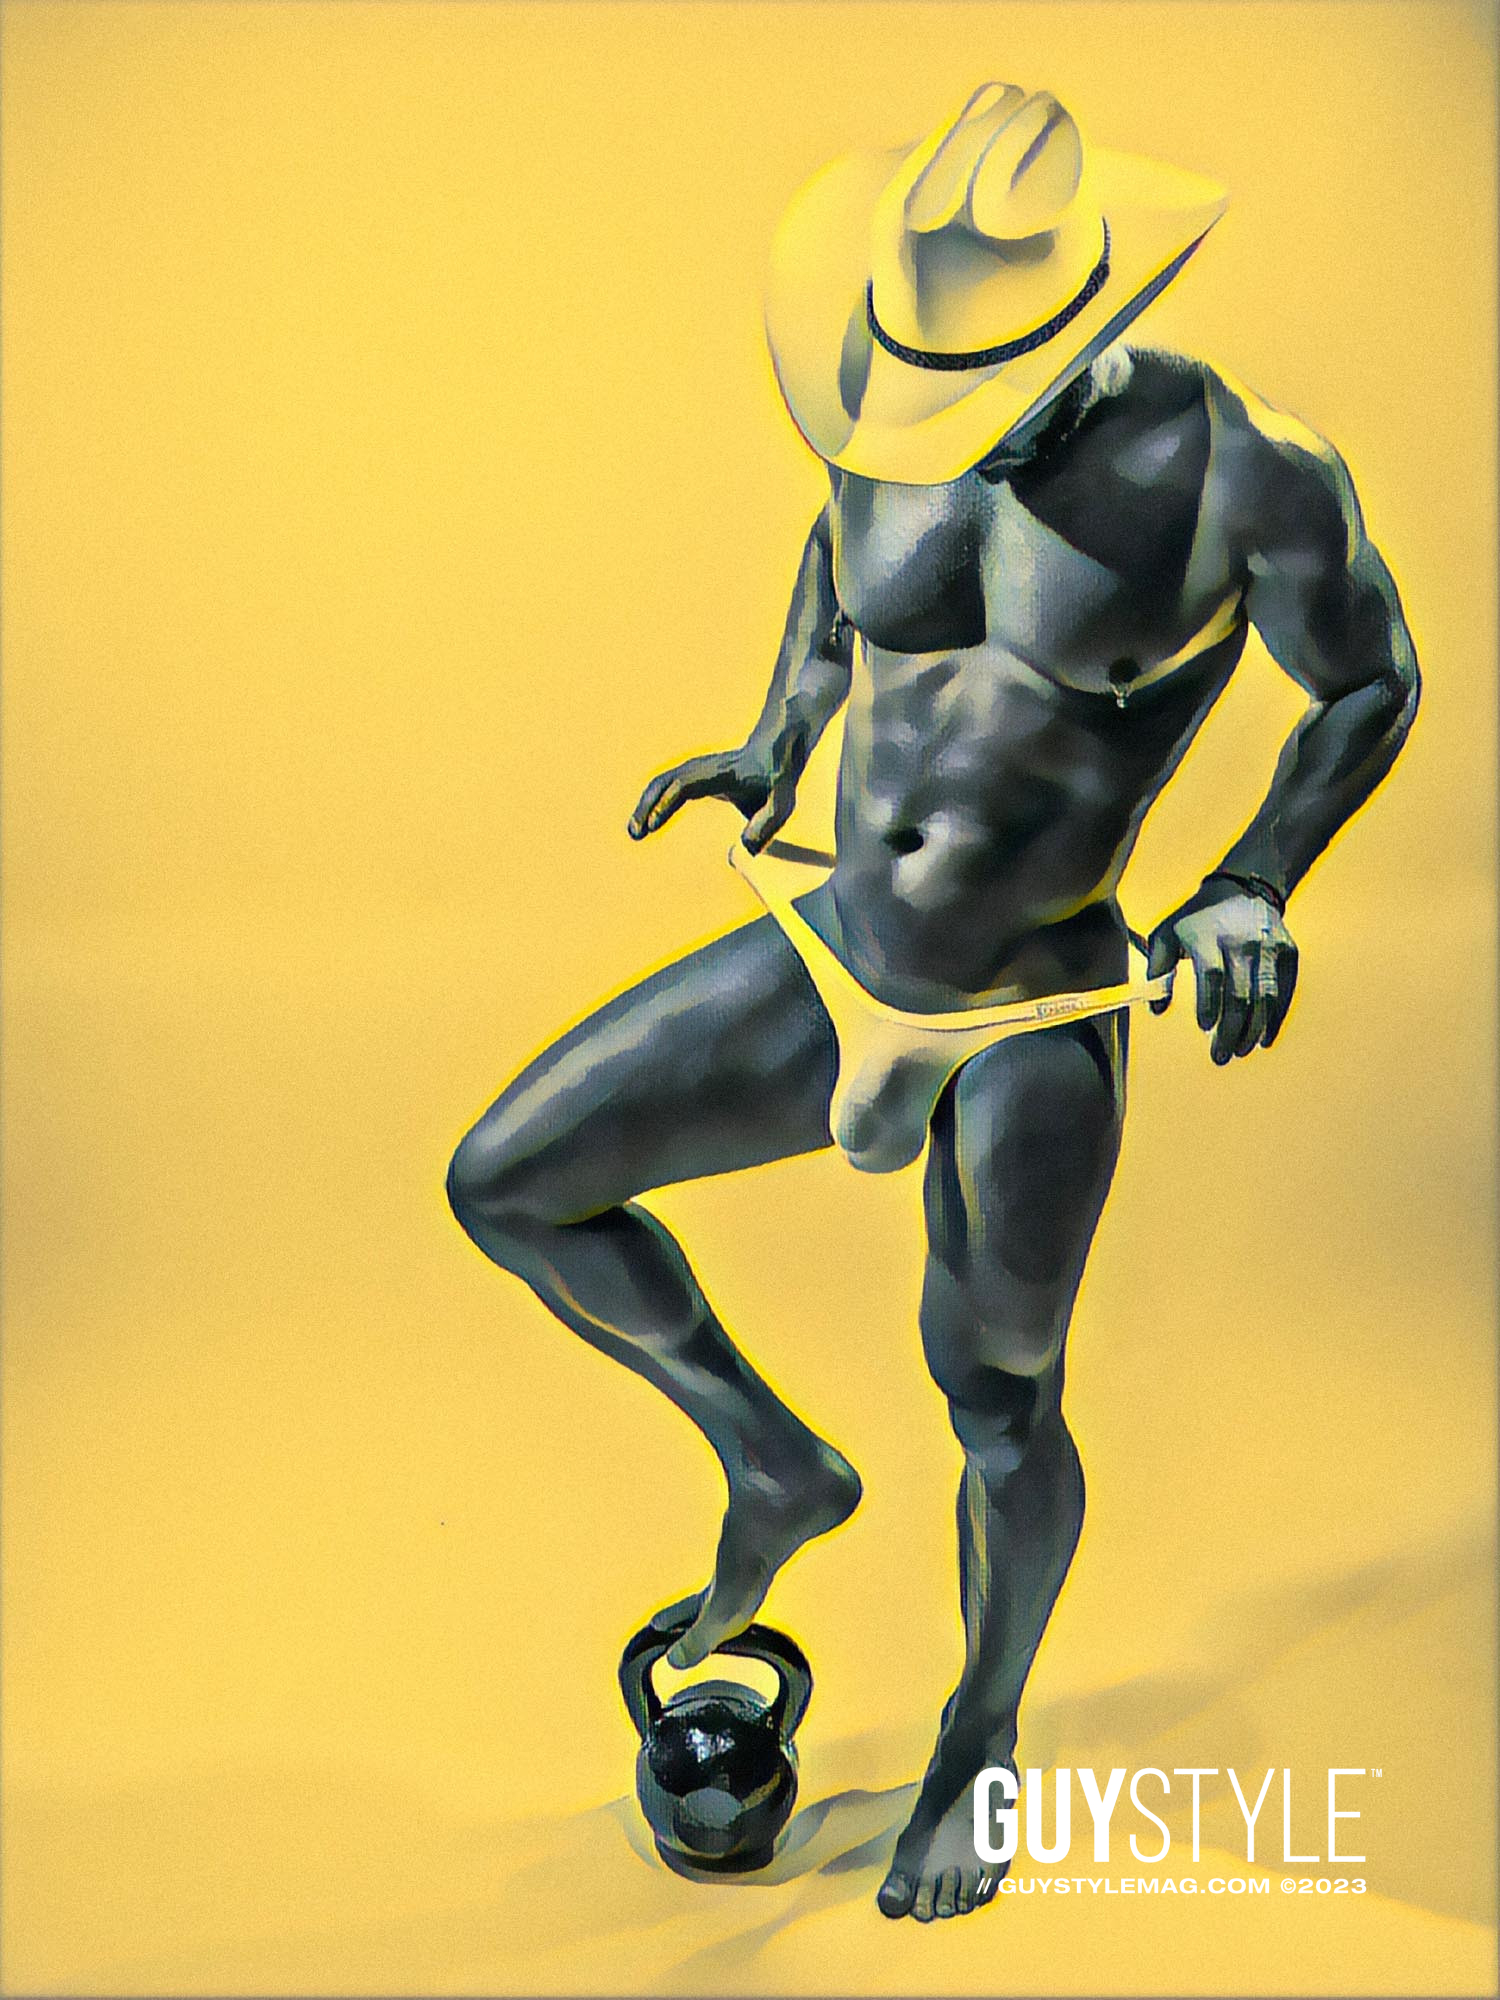 Maxwell Alexander's New Homoerotic Art Drop: A Confluence of AI, Sensuality, and Rebellion – Homoerotic Art ©2023 MAXWELL ALEXANDER